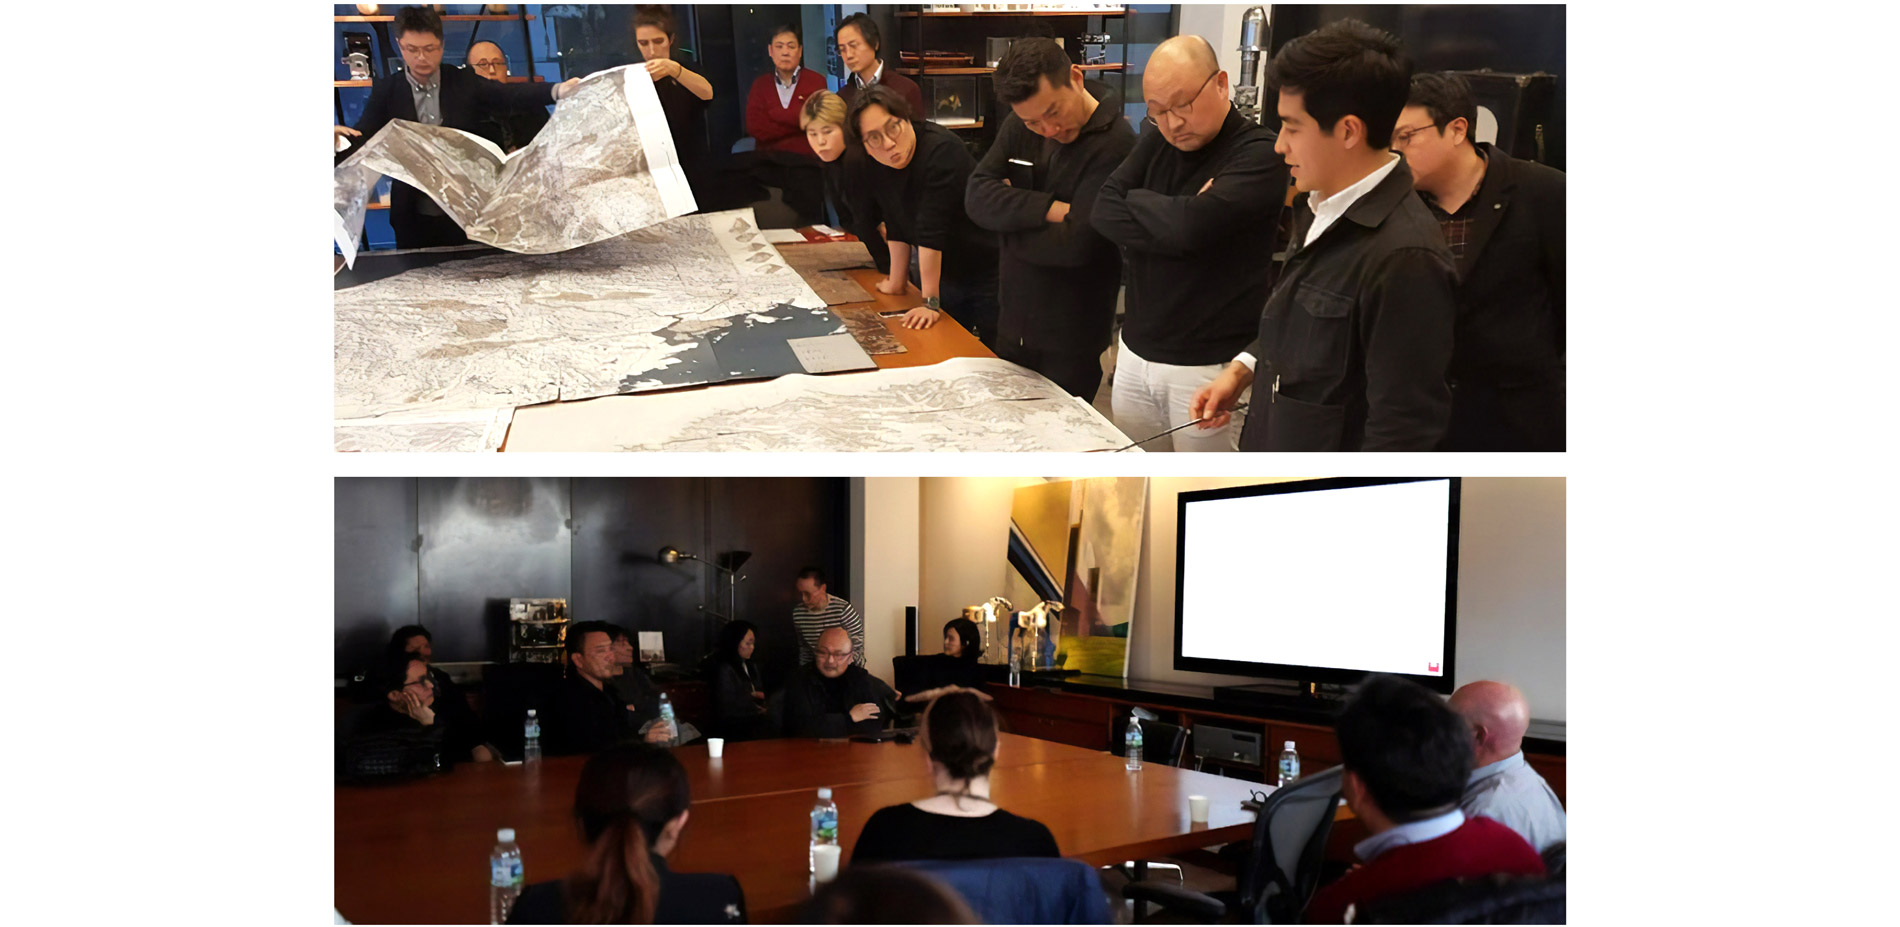 Design Forum in Seoul, South Korea, March 24th, 2018. Exchange of ideas with distinguished local designers on how to develop the DMZ Area toward unifi…